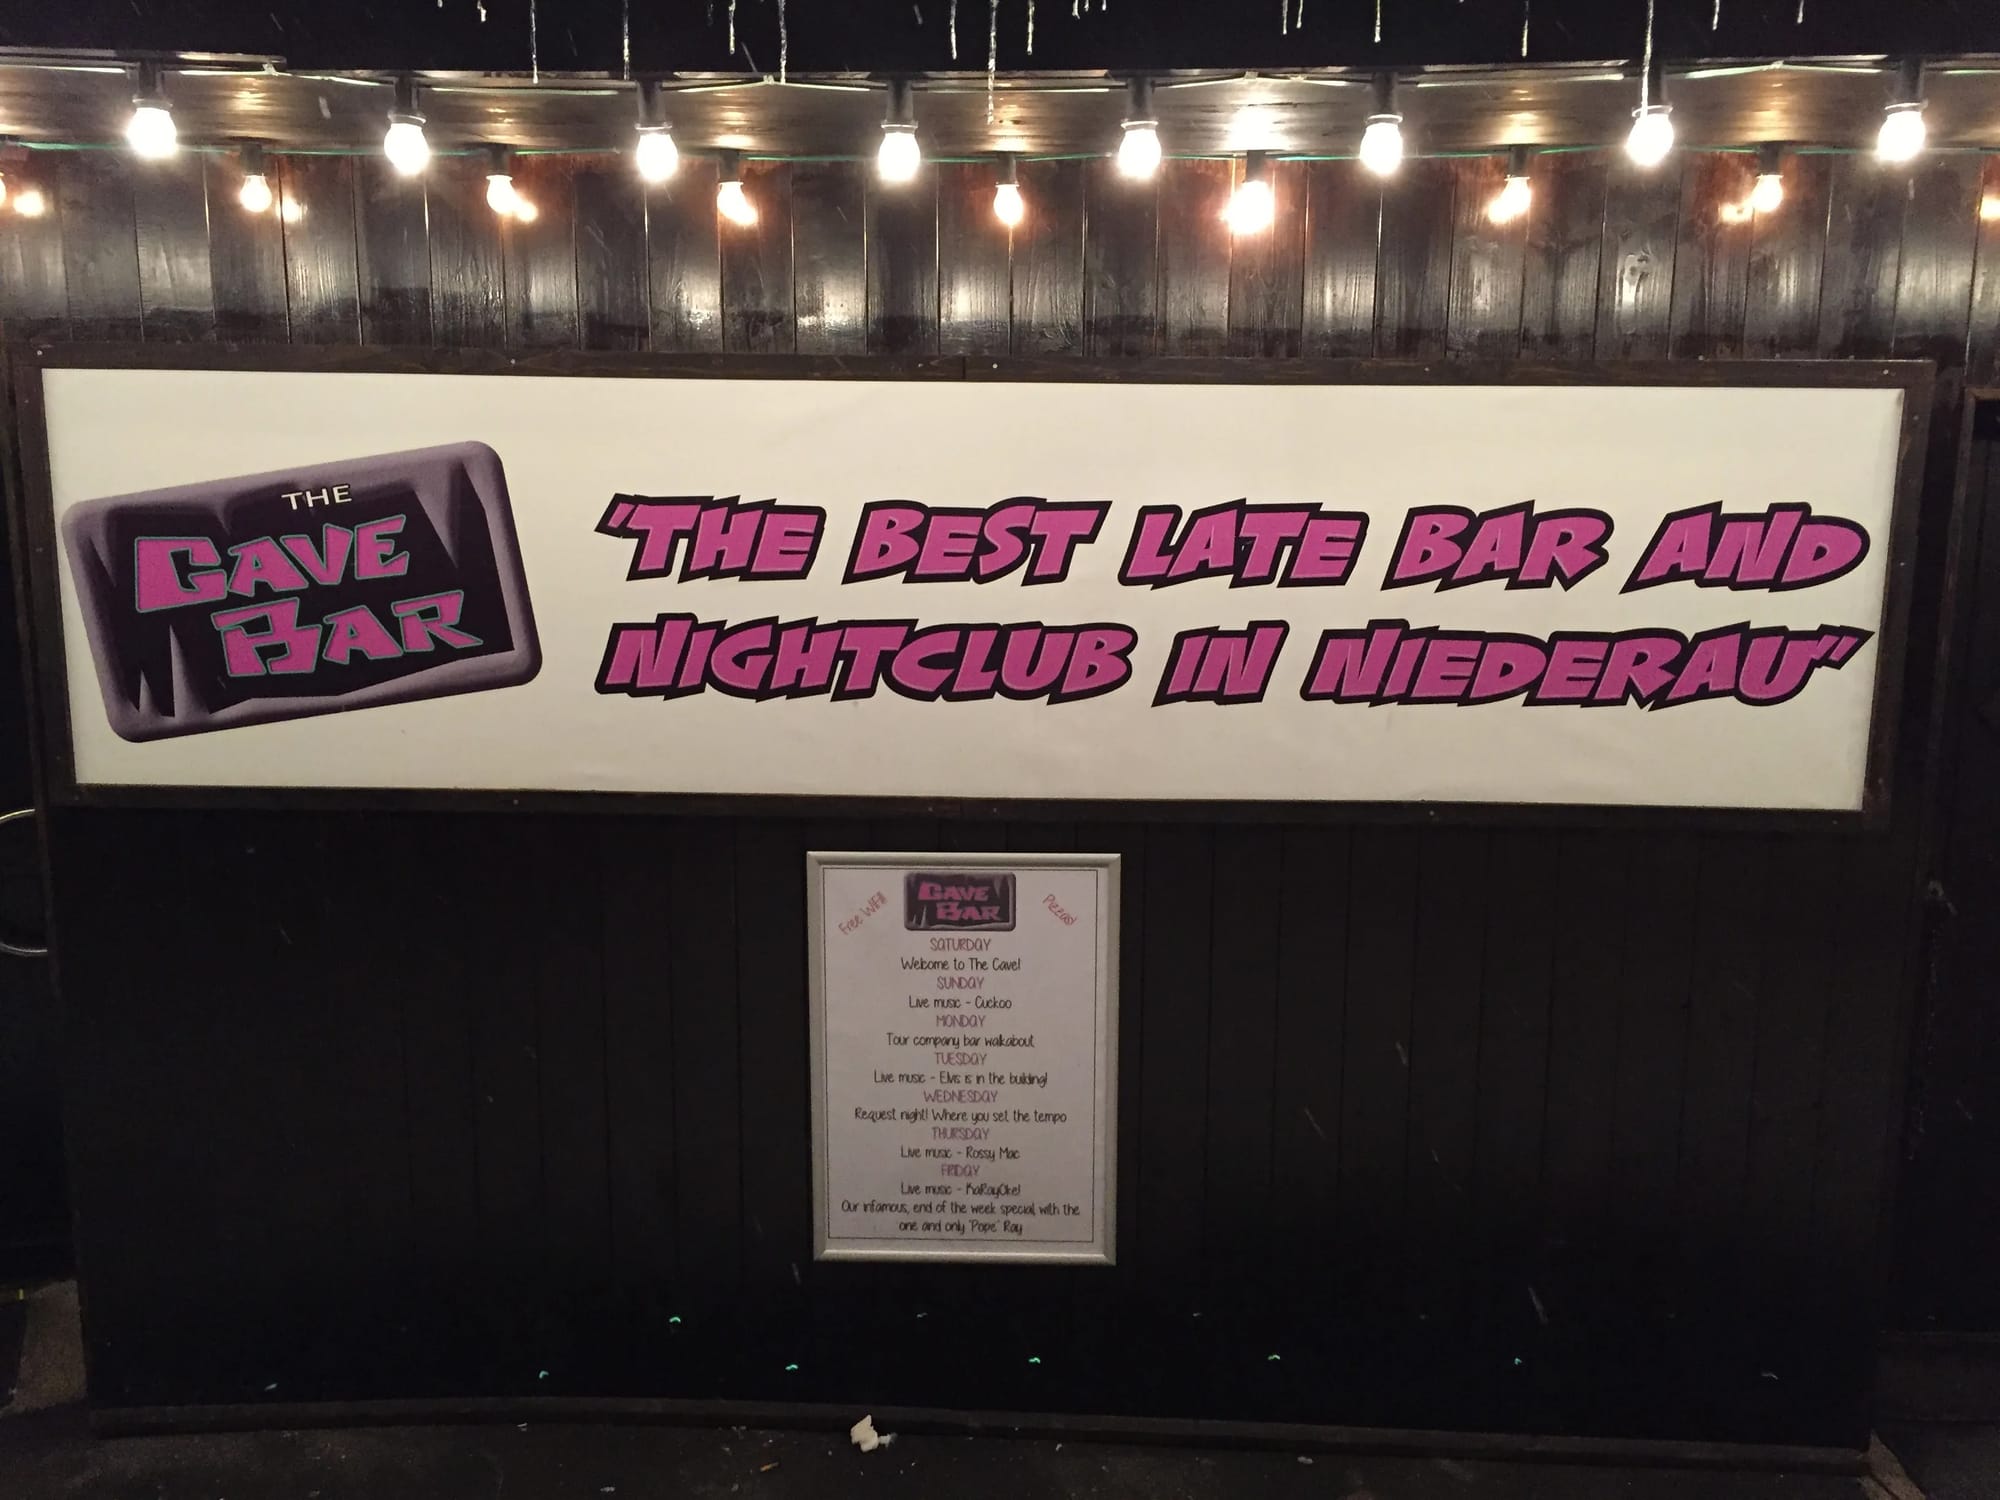 Photo by Author — the “best late bar and nightclub” in Niederau